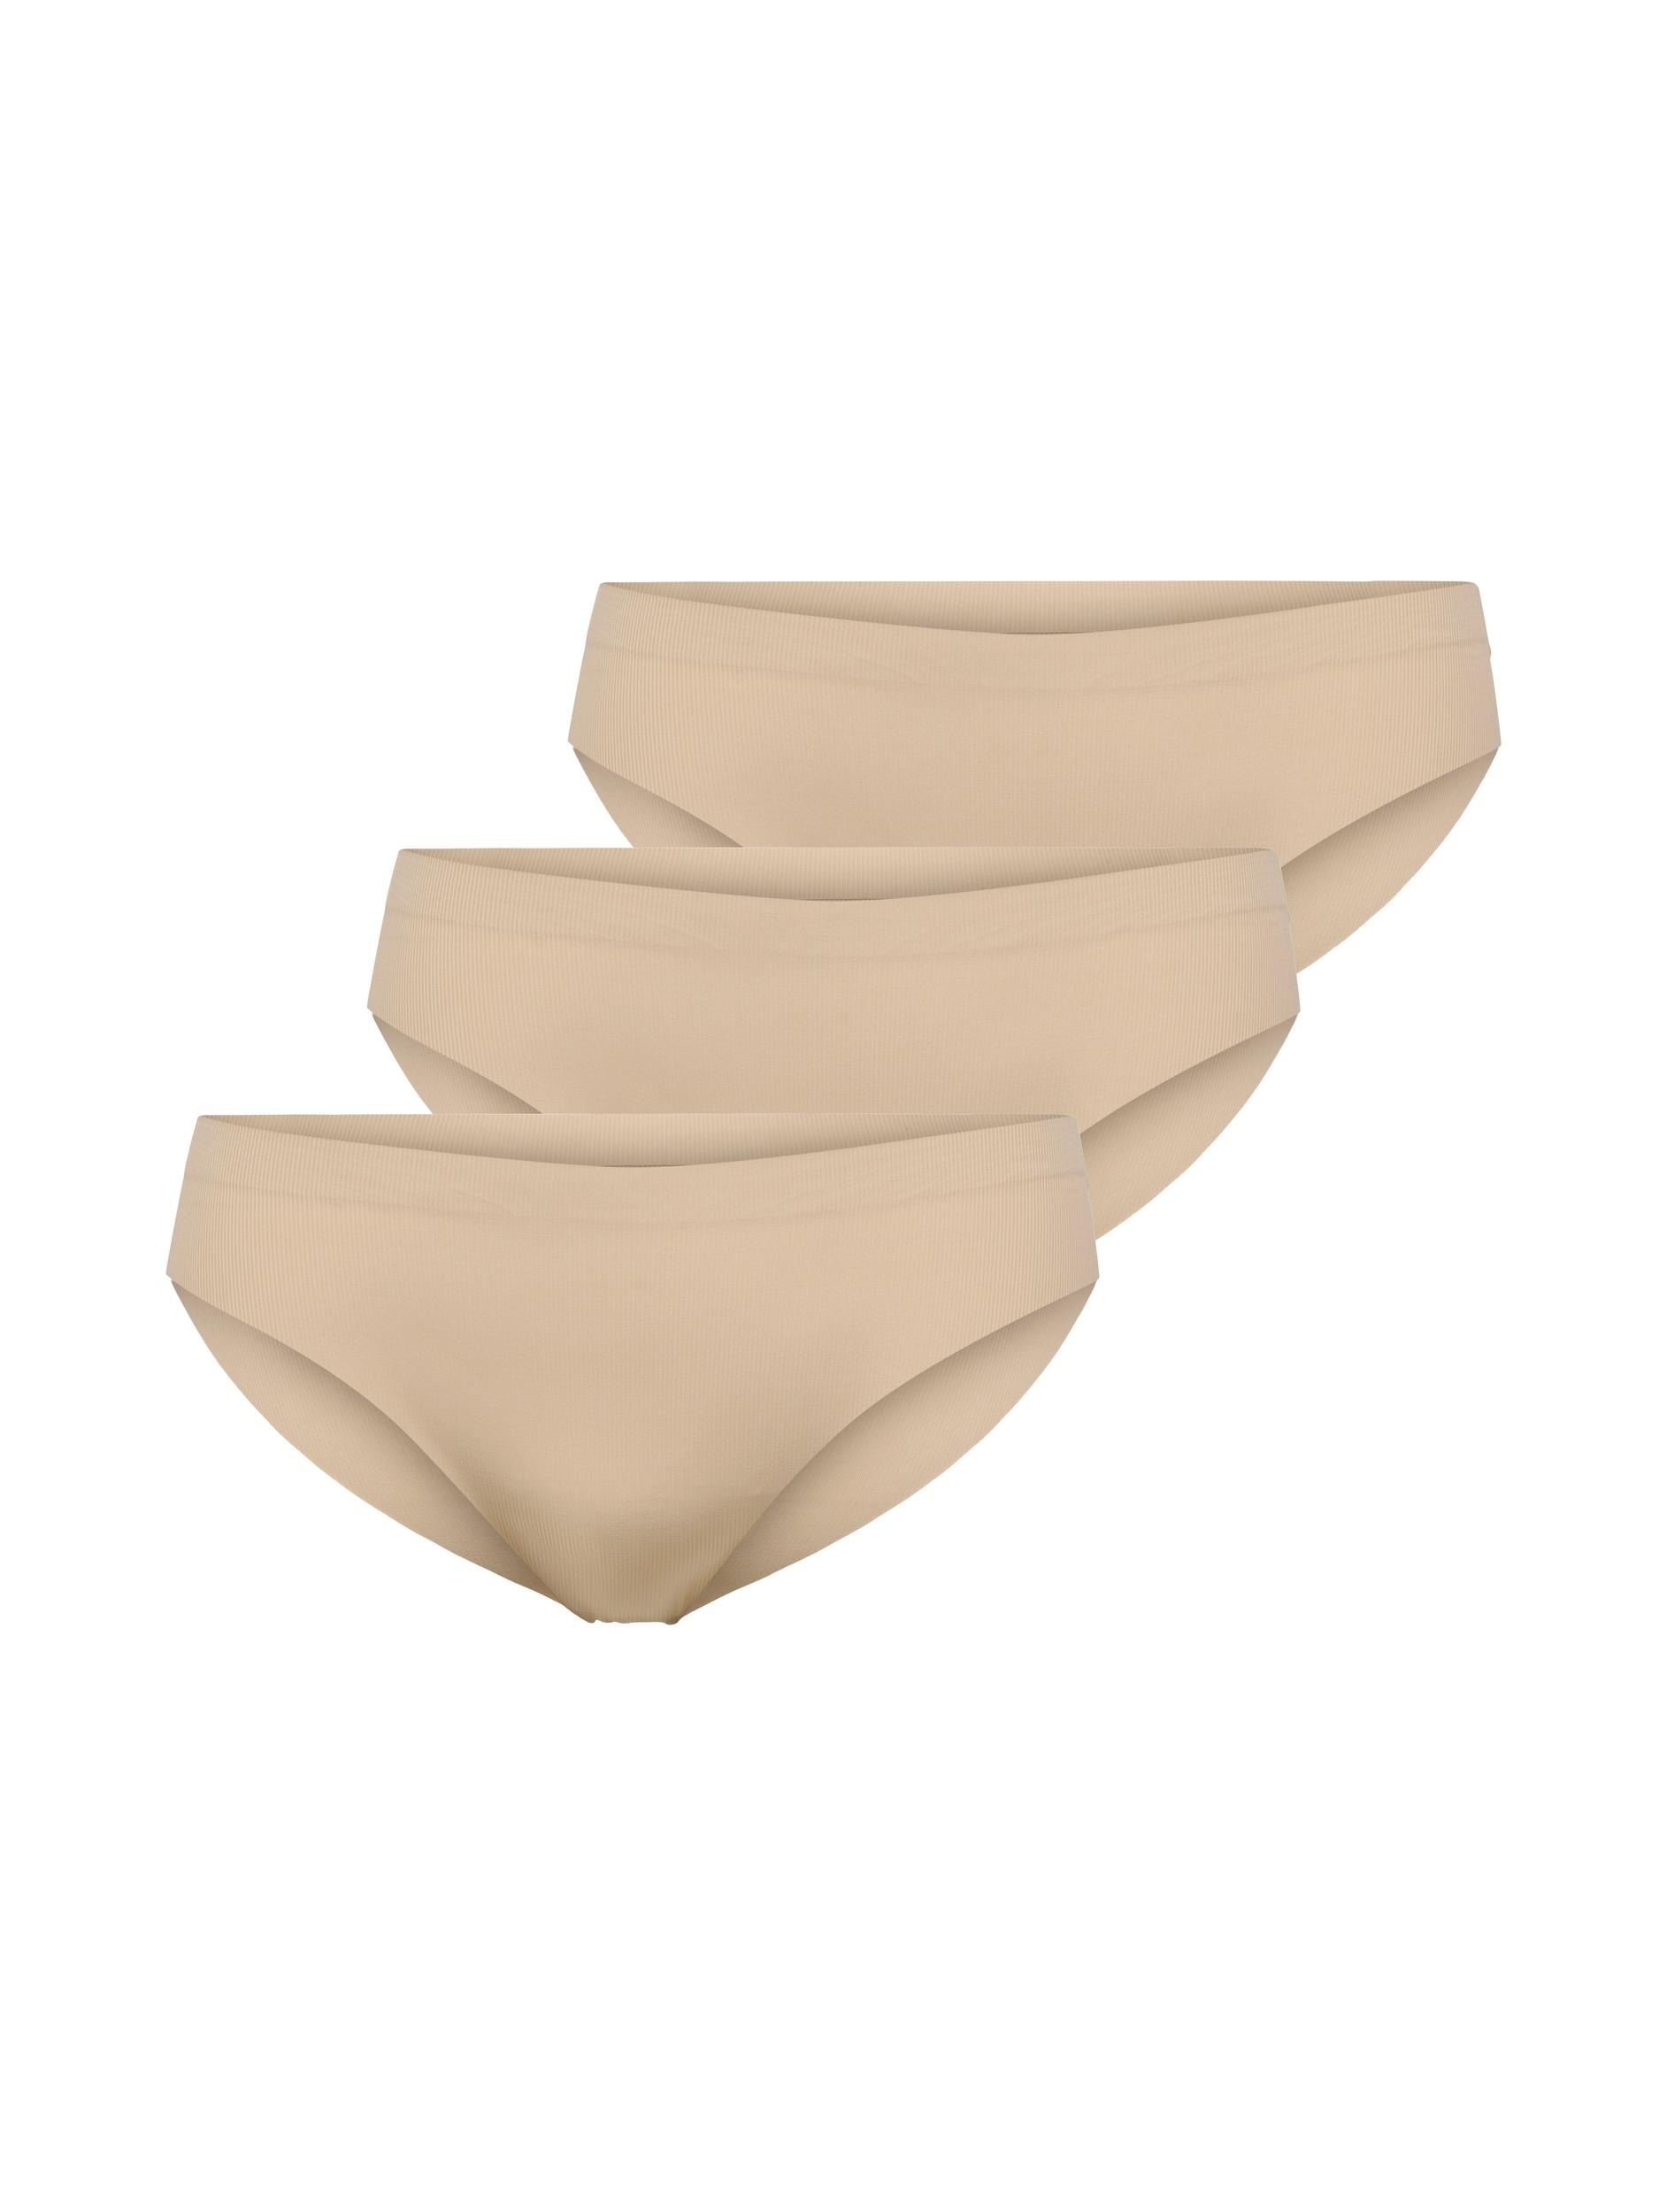 3-PACK Slip bestellen bei ONLY »ONLTRACY 3 RIB BRIEF«, INVISIBLE (Set, St.) OTTO